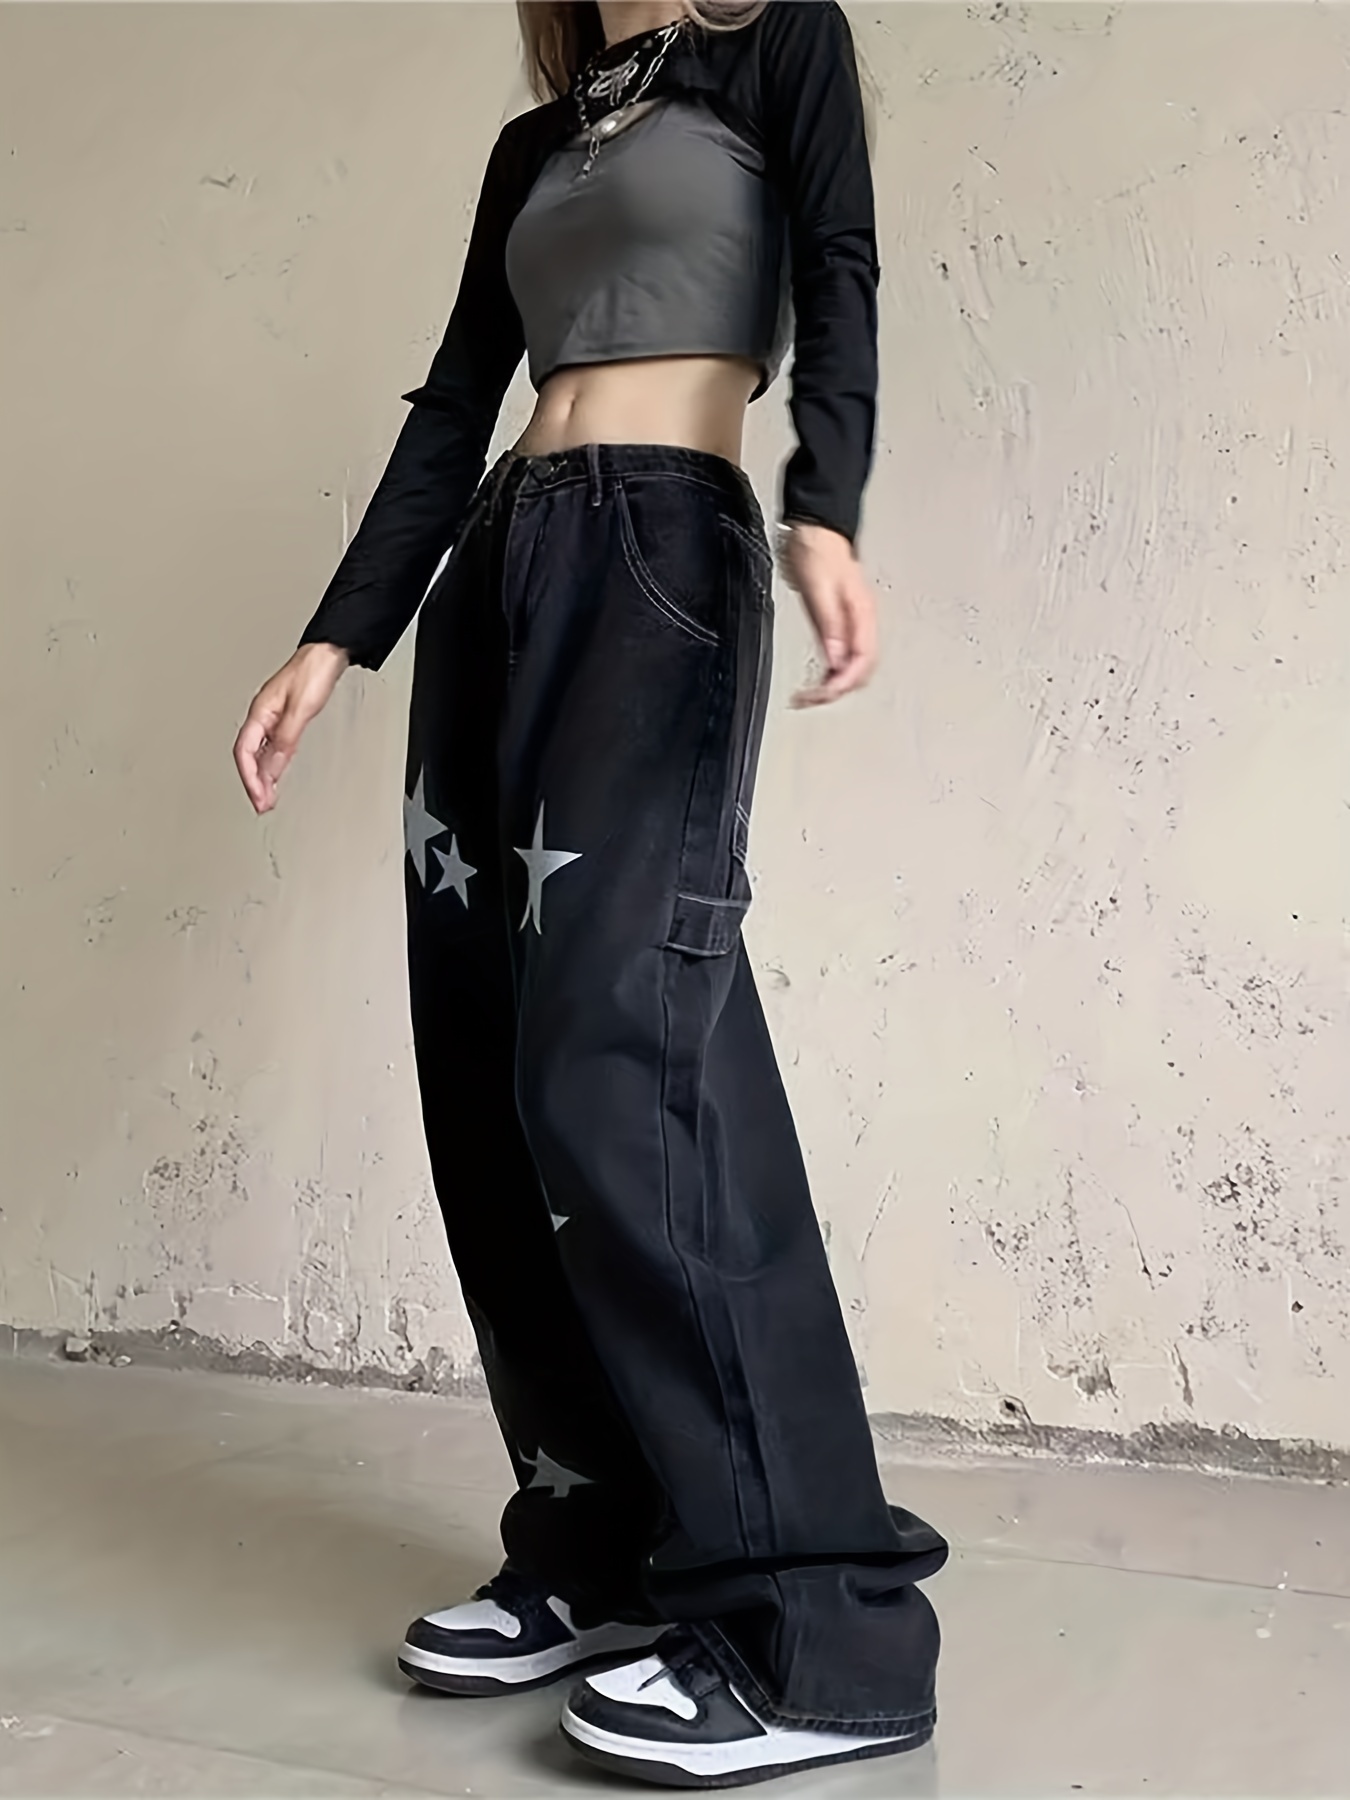 Indie Aesthetics E-Girl Vintage Trousers for Women Low Waist Flare